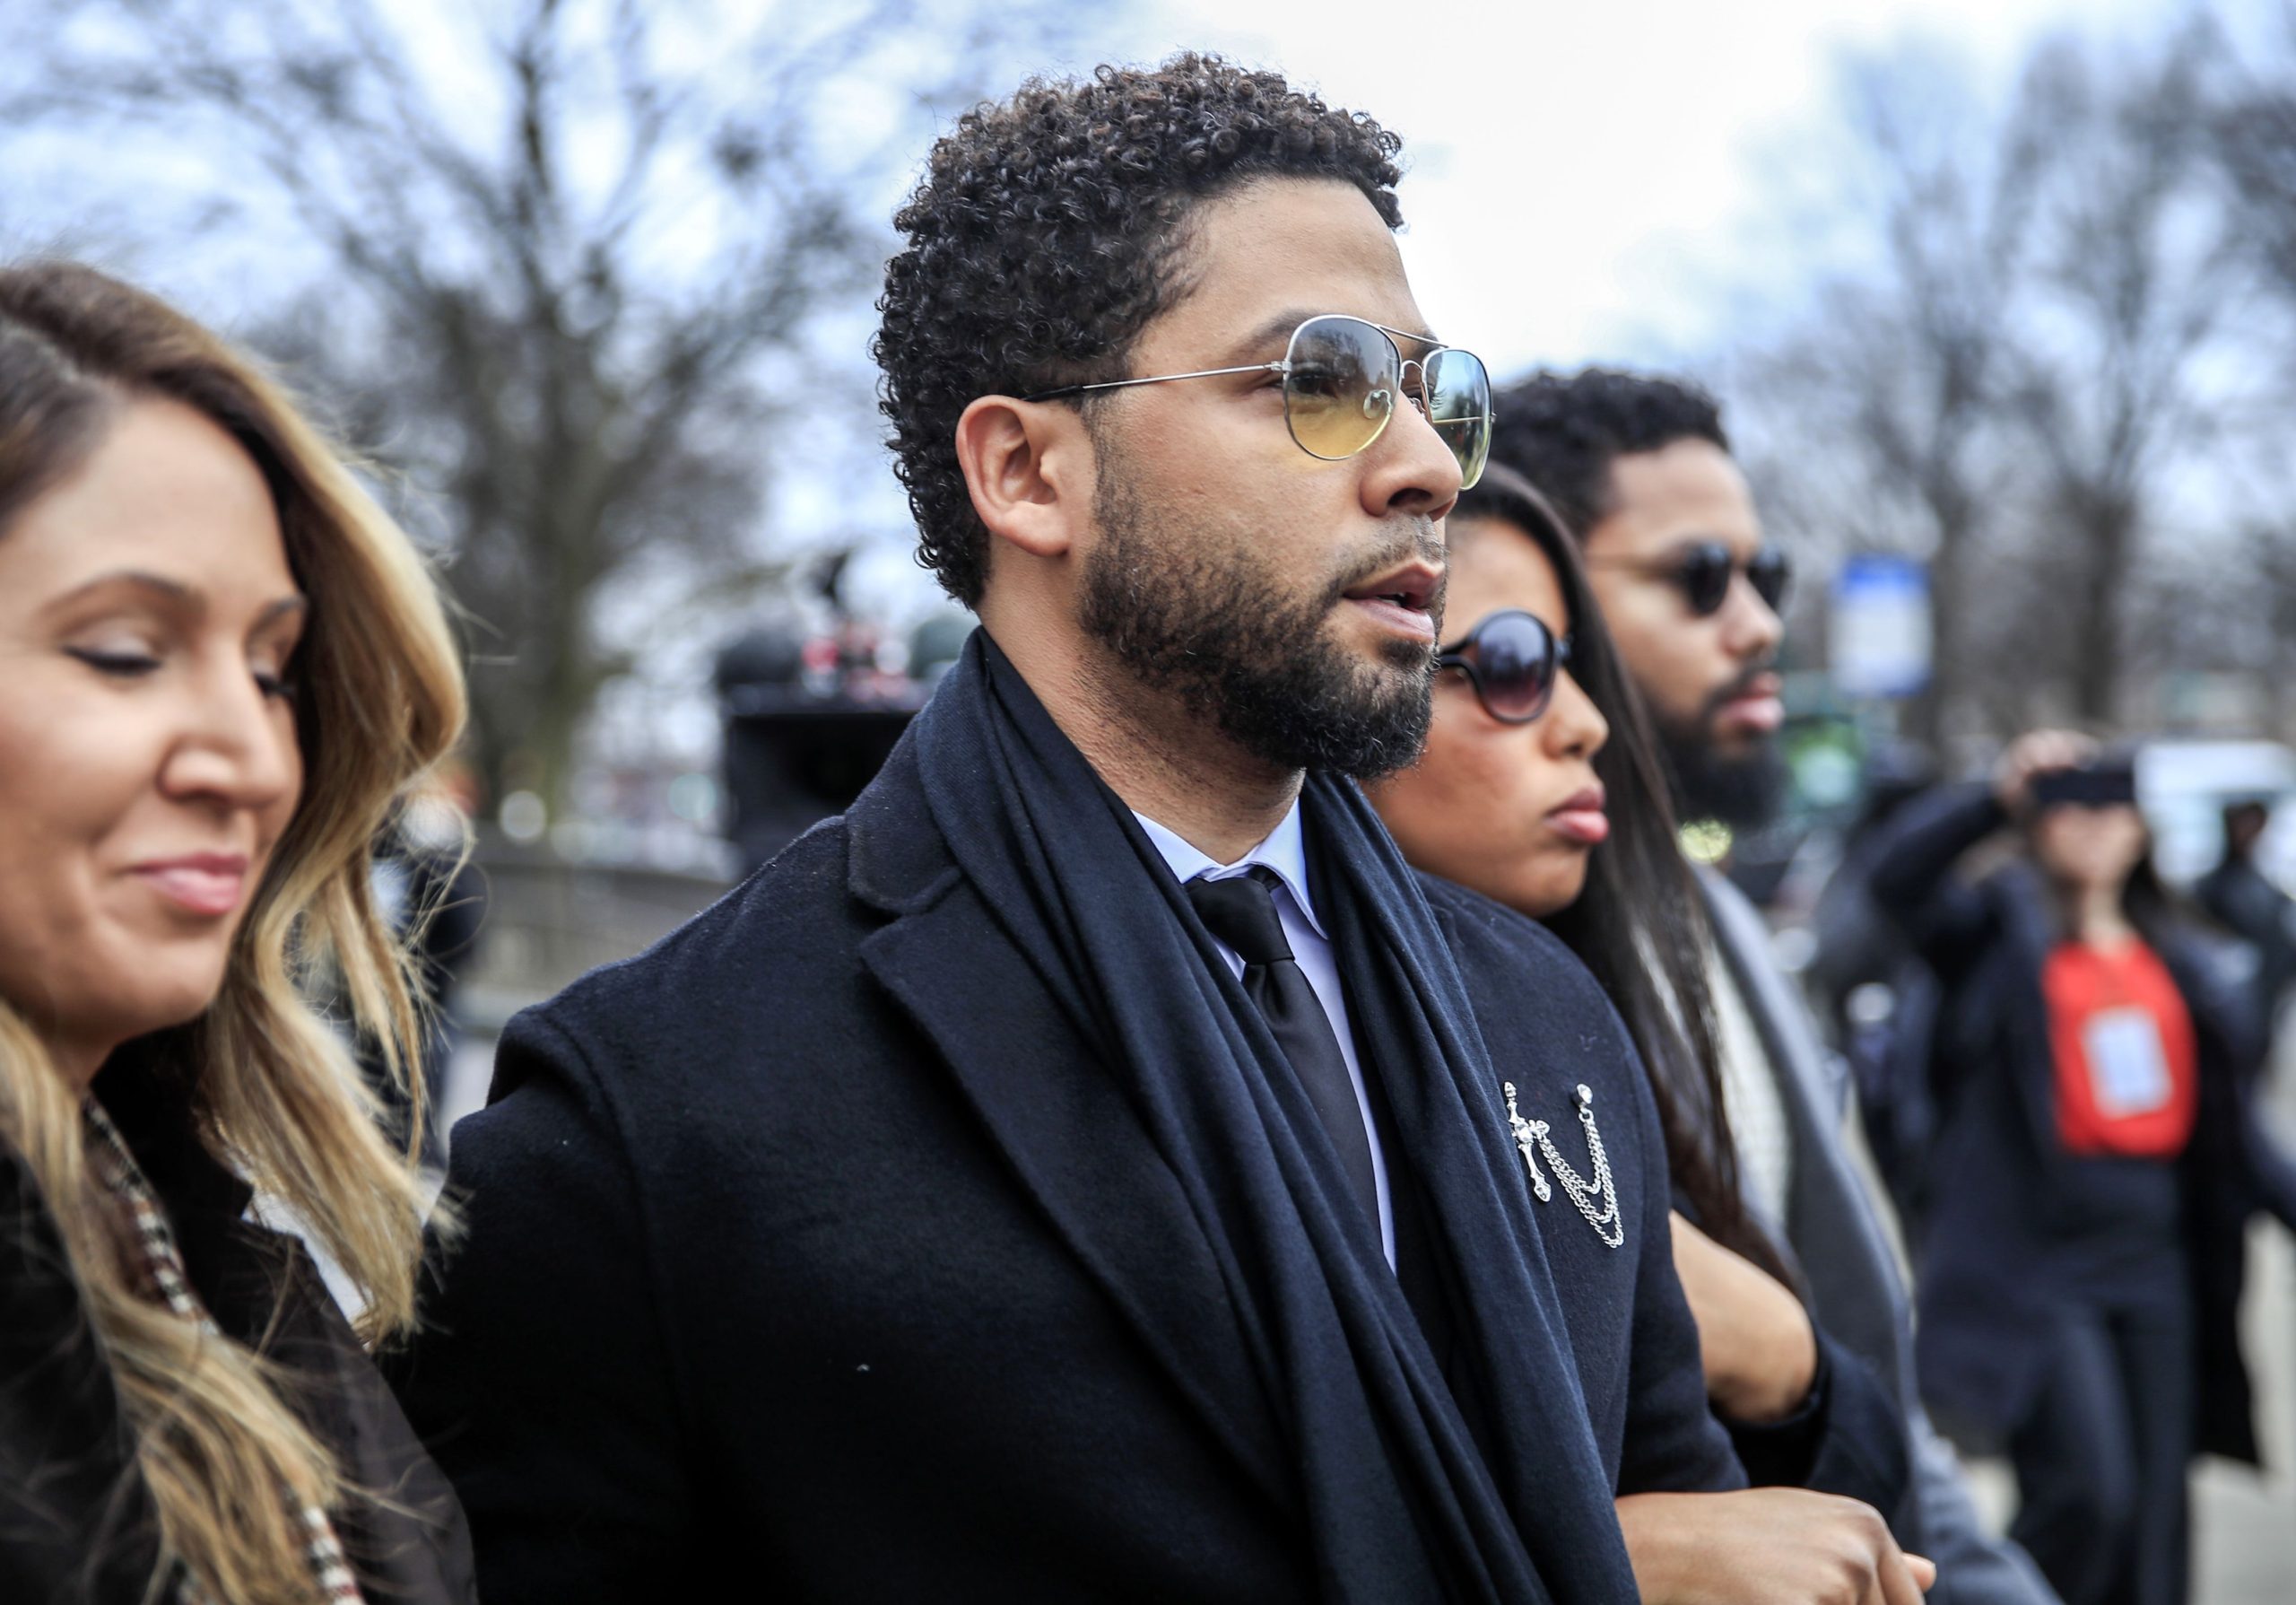 Federal Judge Tosses Jussie Smollett's Case Against City of Chicago